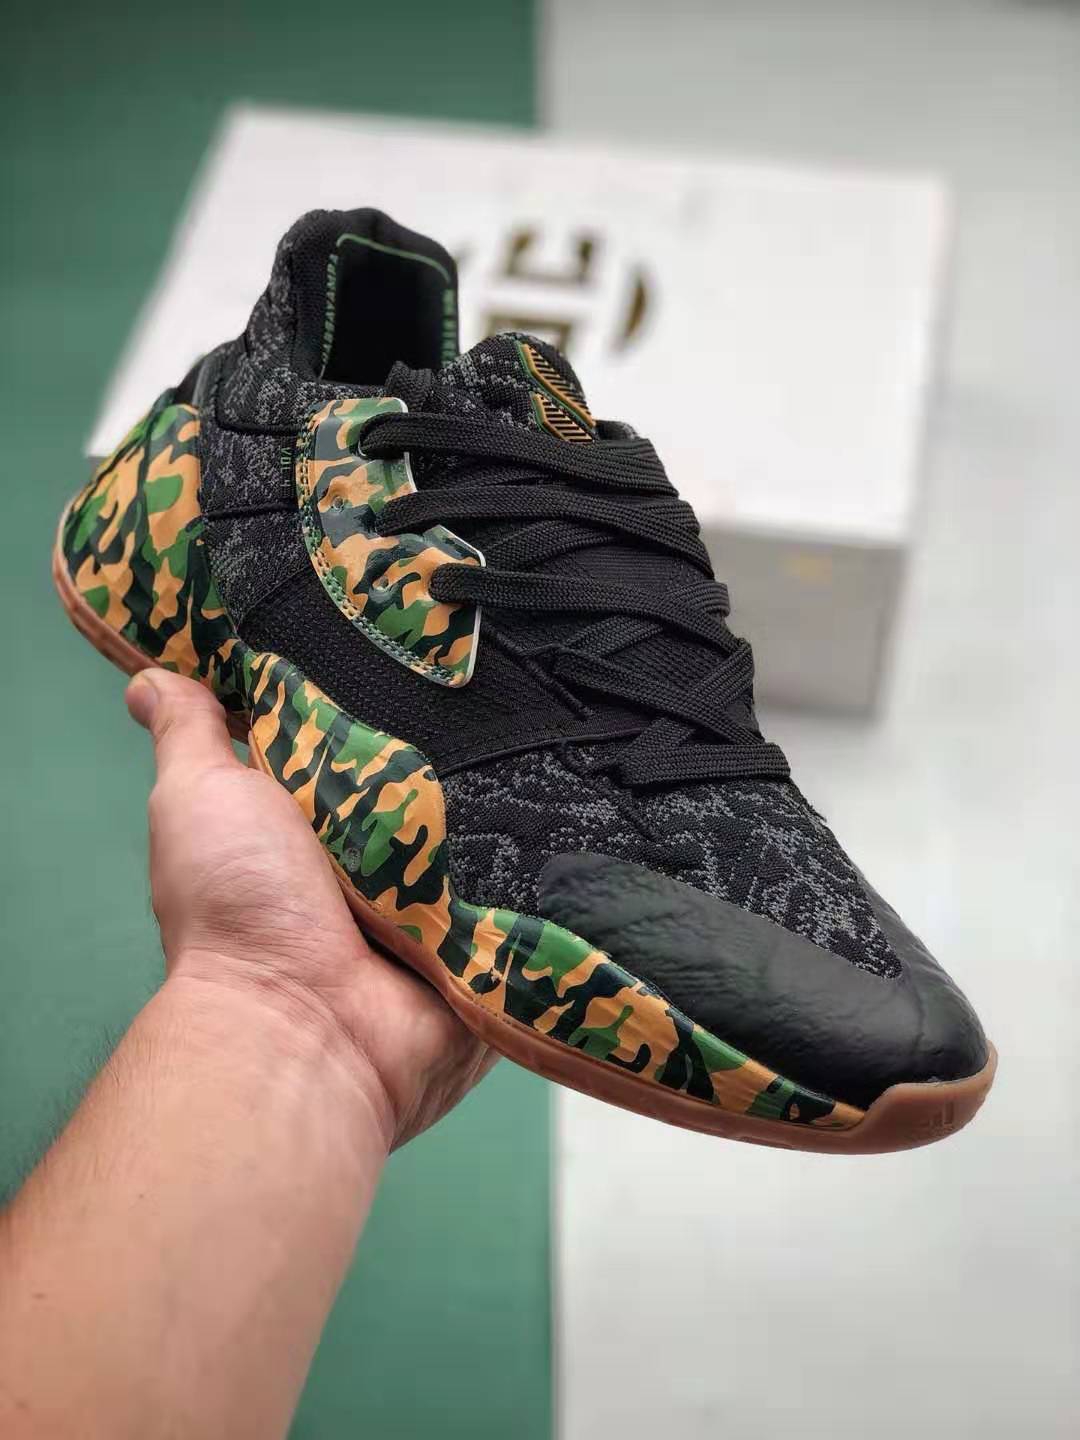 Adidas Harden Vol. 4 Black Camo EF1259 - Ultimate Style and Performance